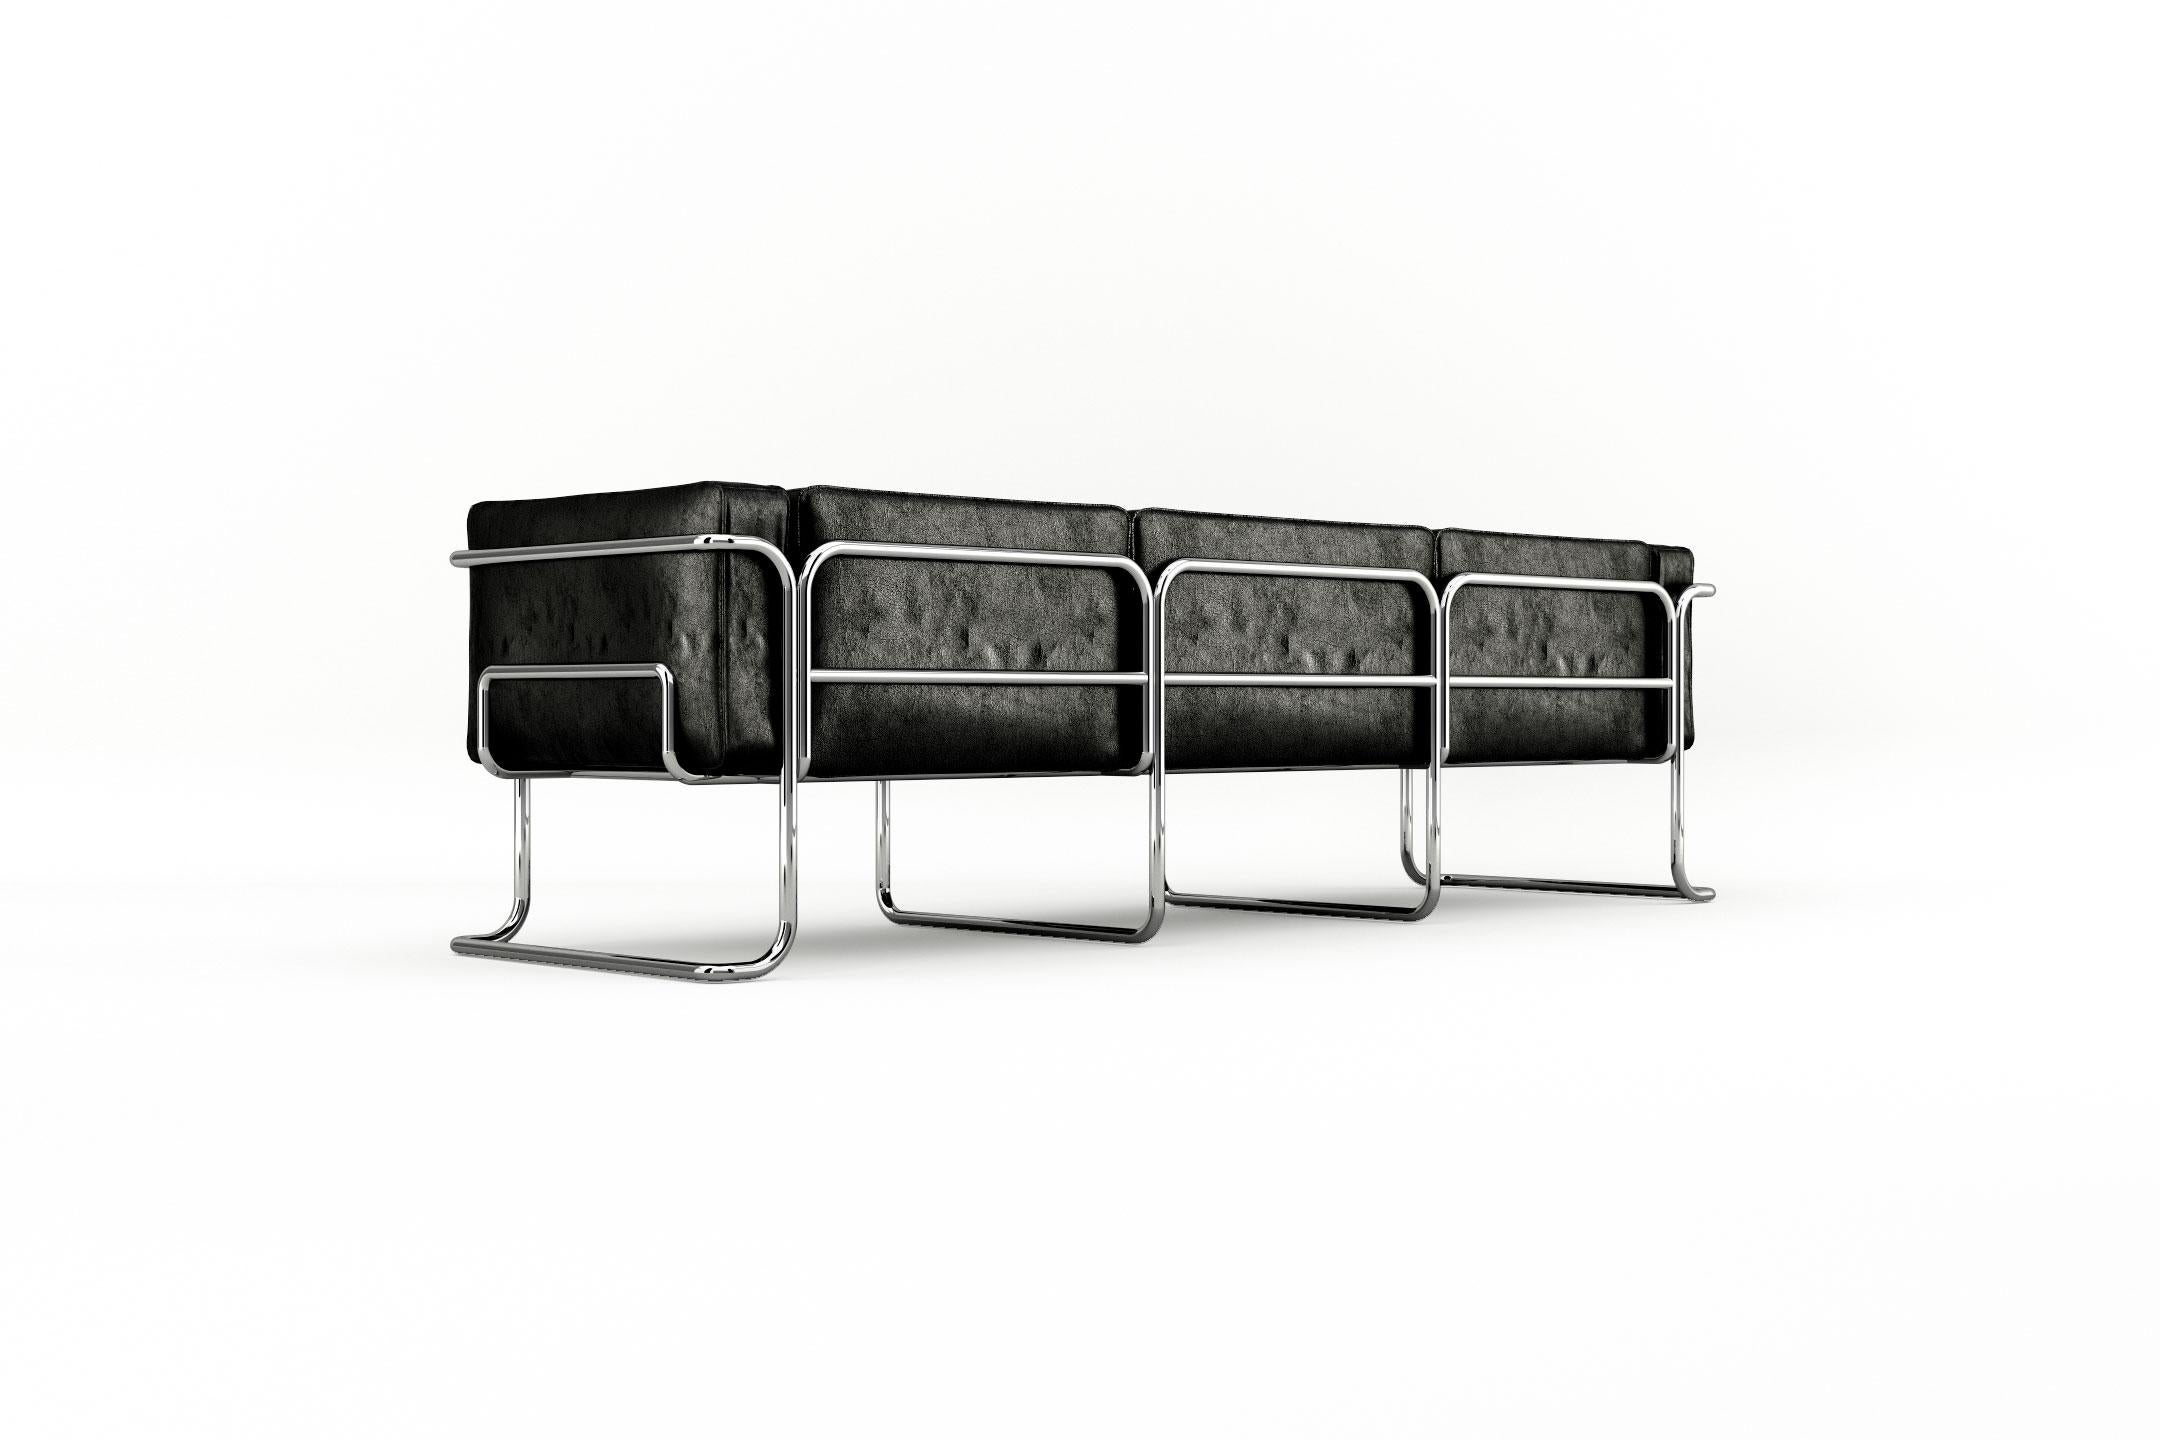 Polished Lotus 3 Seat Sofa - Modern Black Leather Sofa with Stainless Steel Legs For Sale